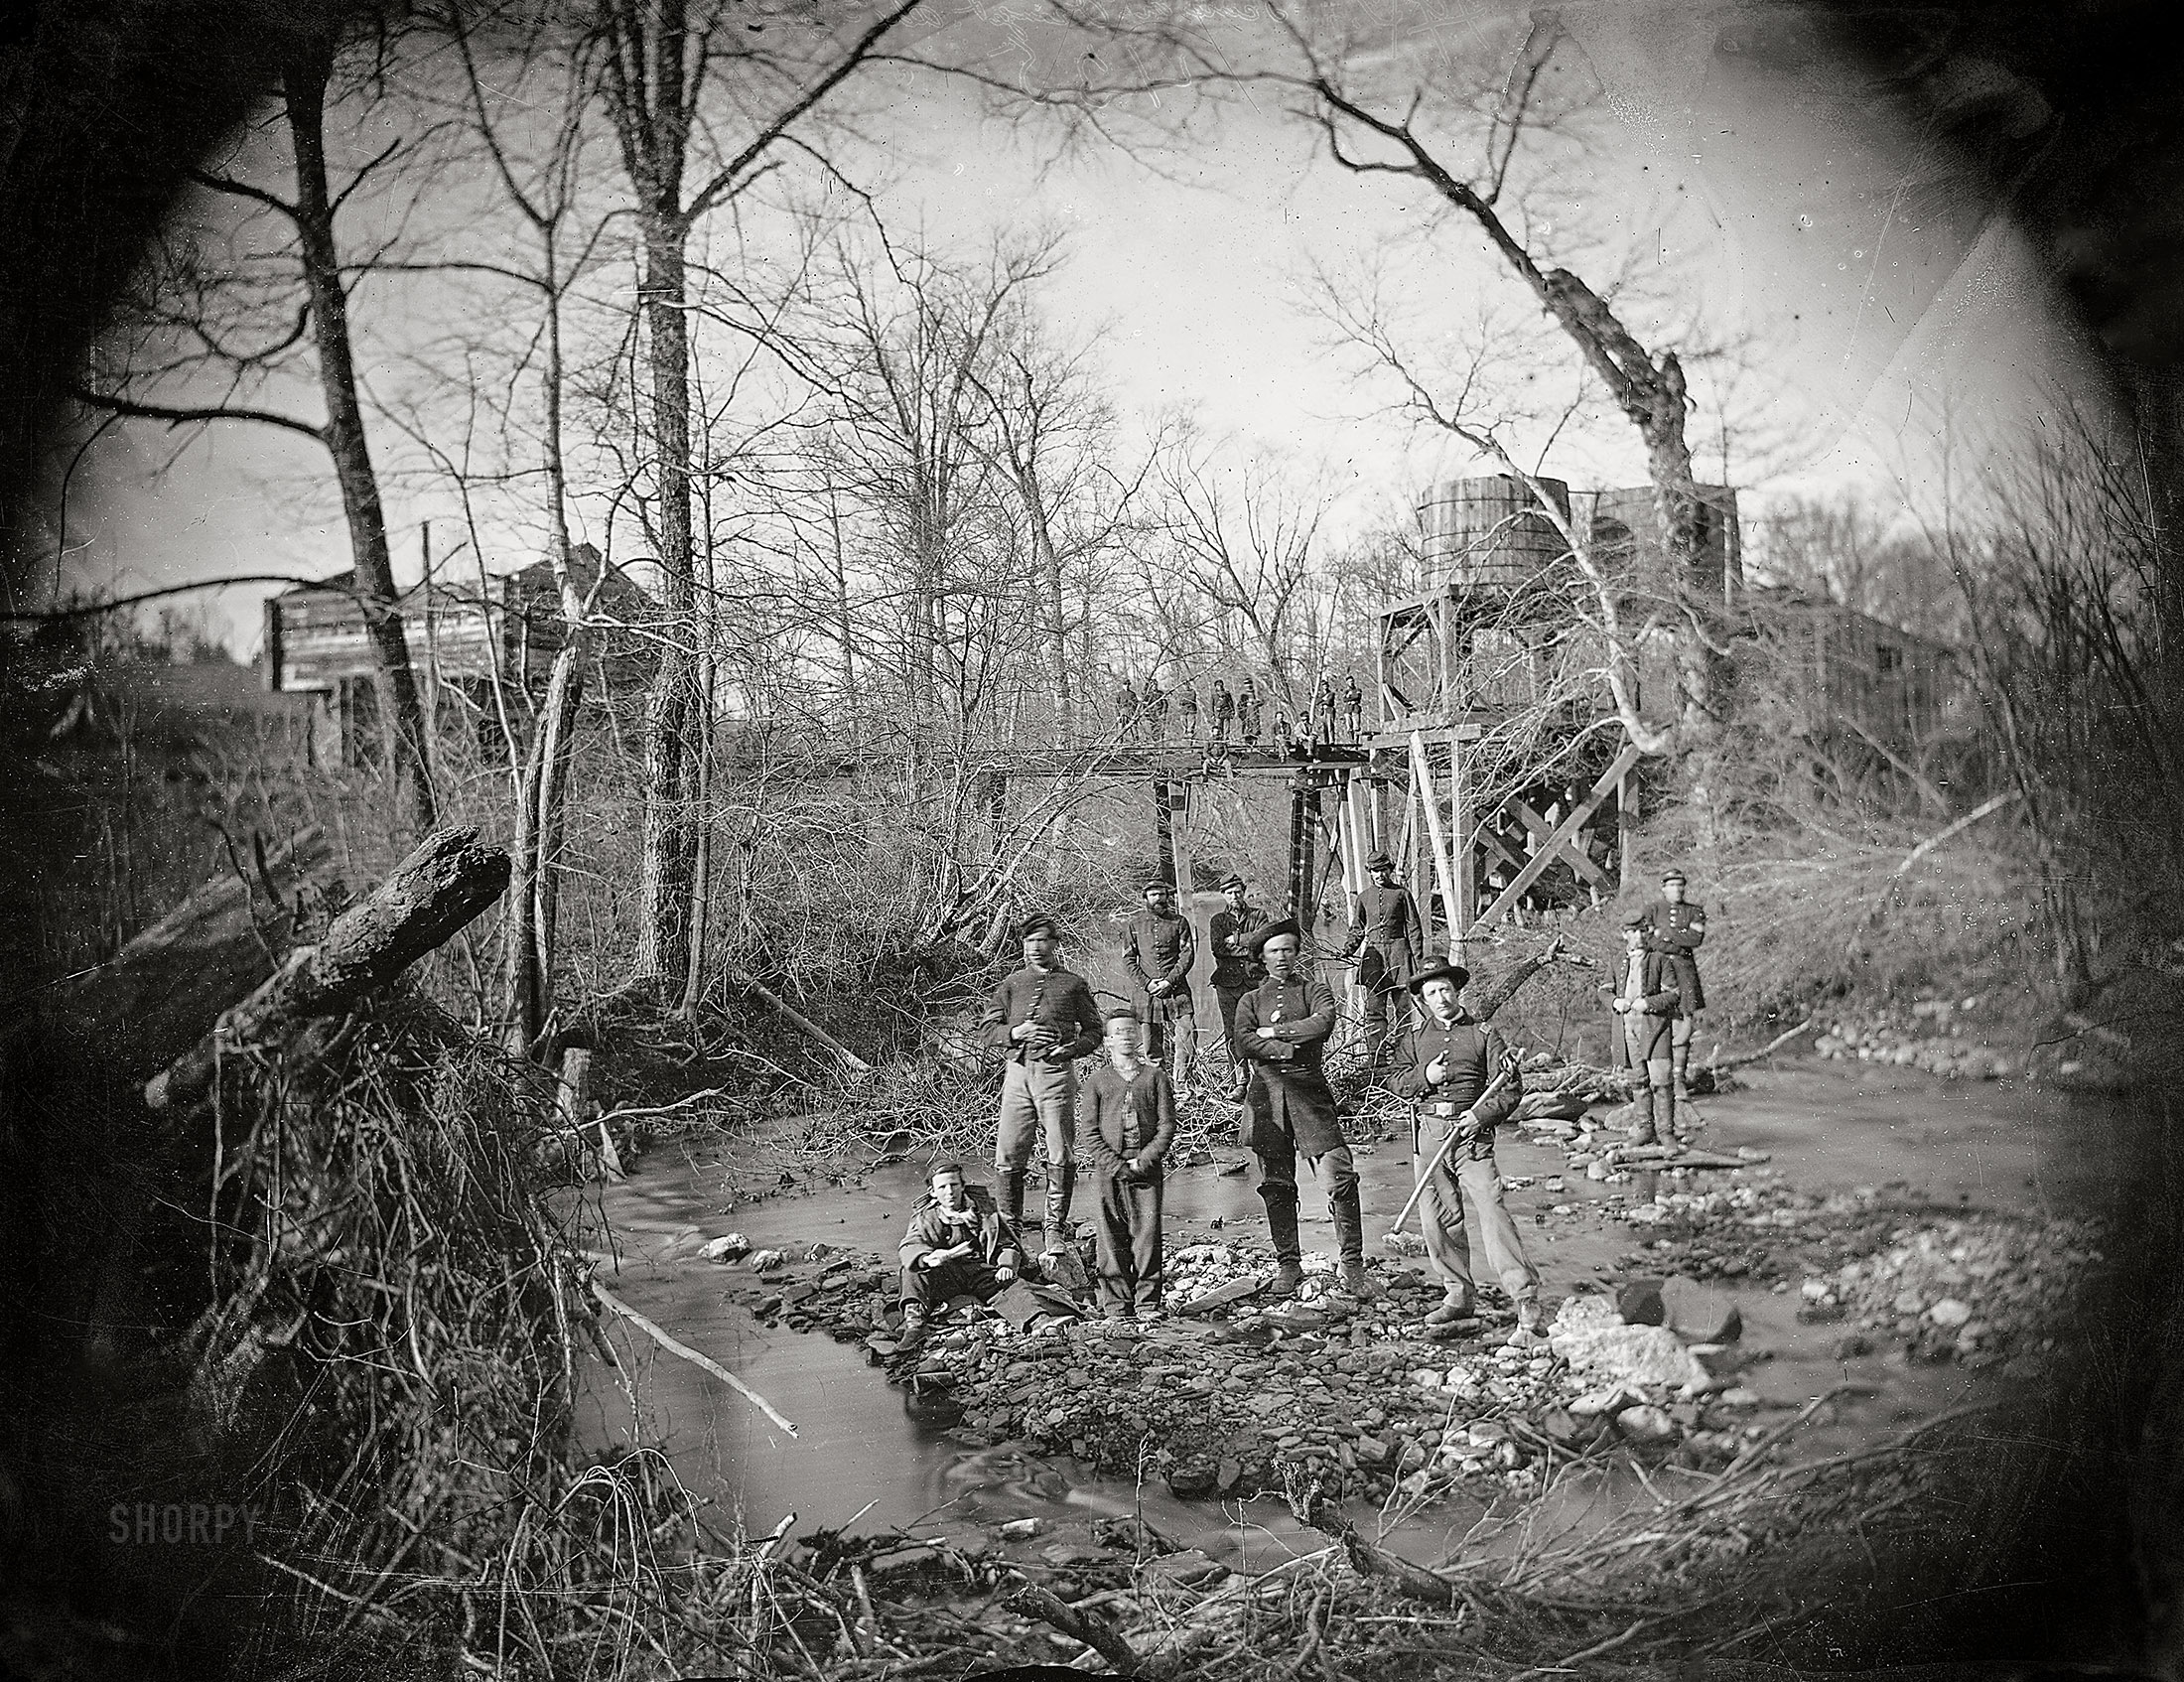 1864. "Federal cavalry guarding the Orange & Alexandria R.R. near Union Mills, Virginia." Wet plate glass negative by Mathew Brady -- National Archives. View full size.